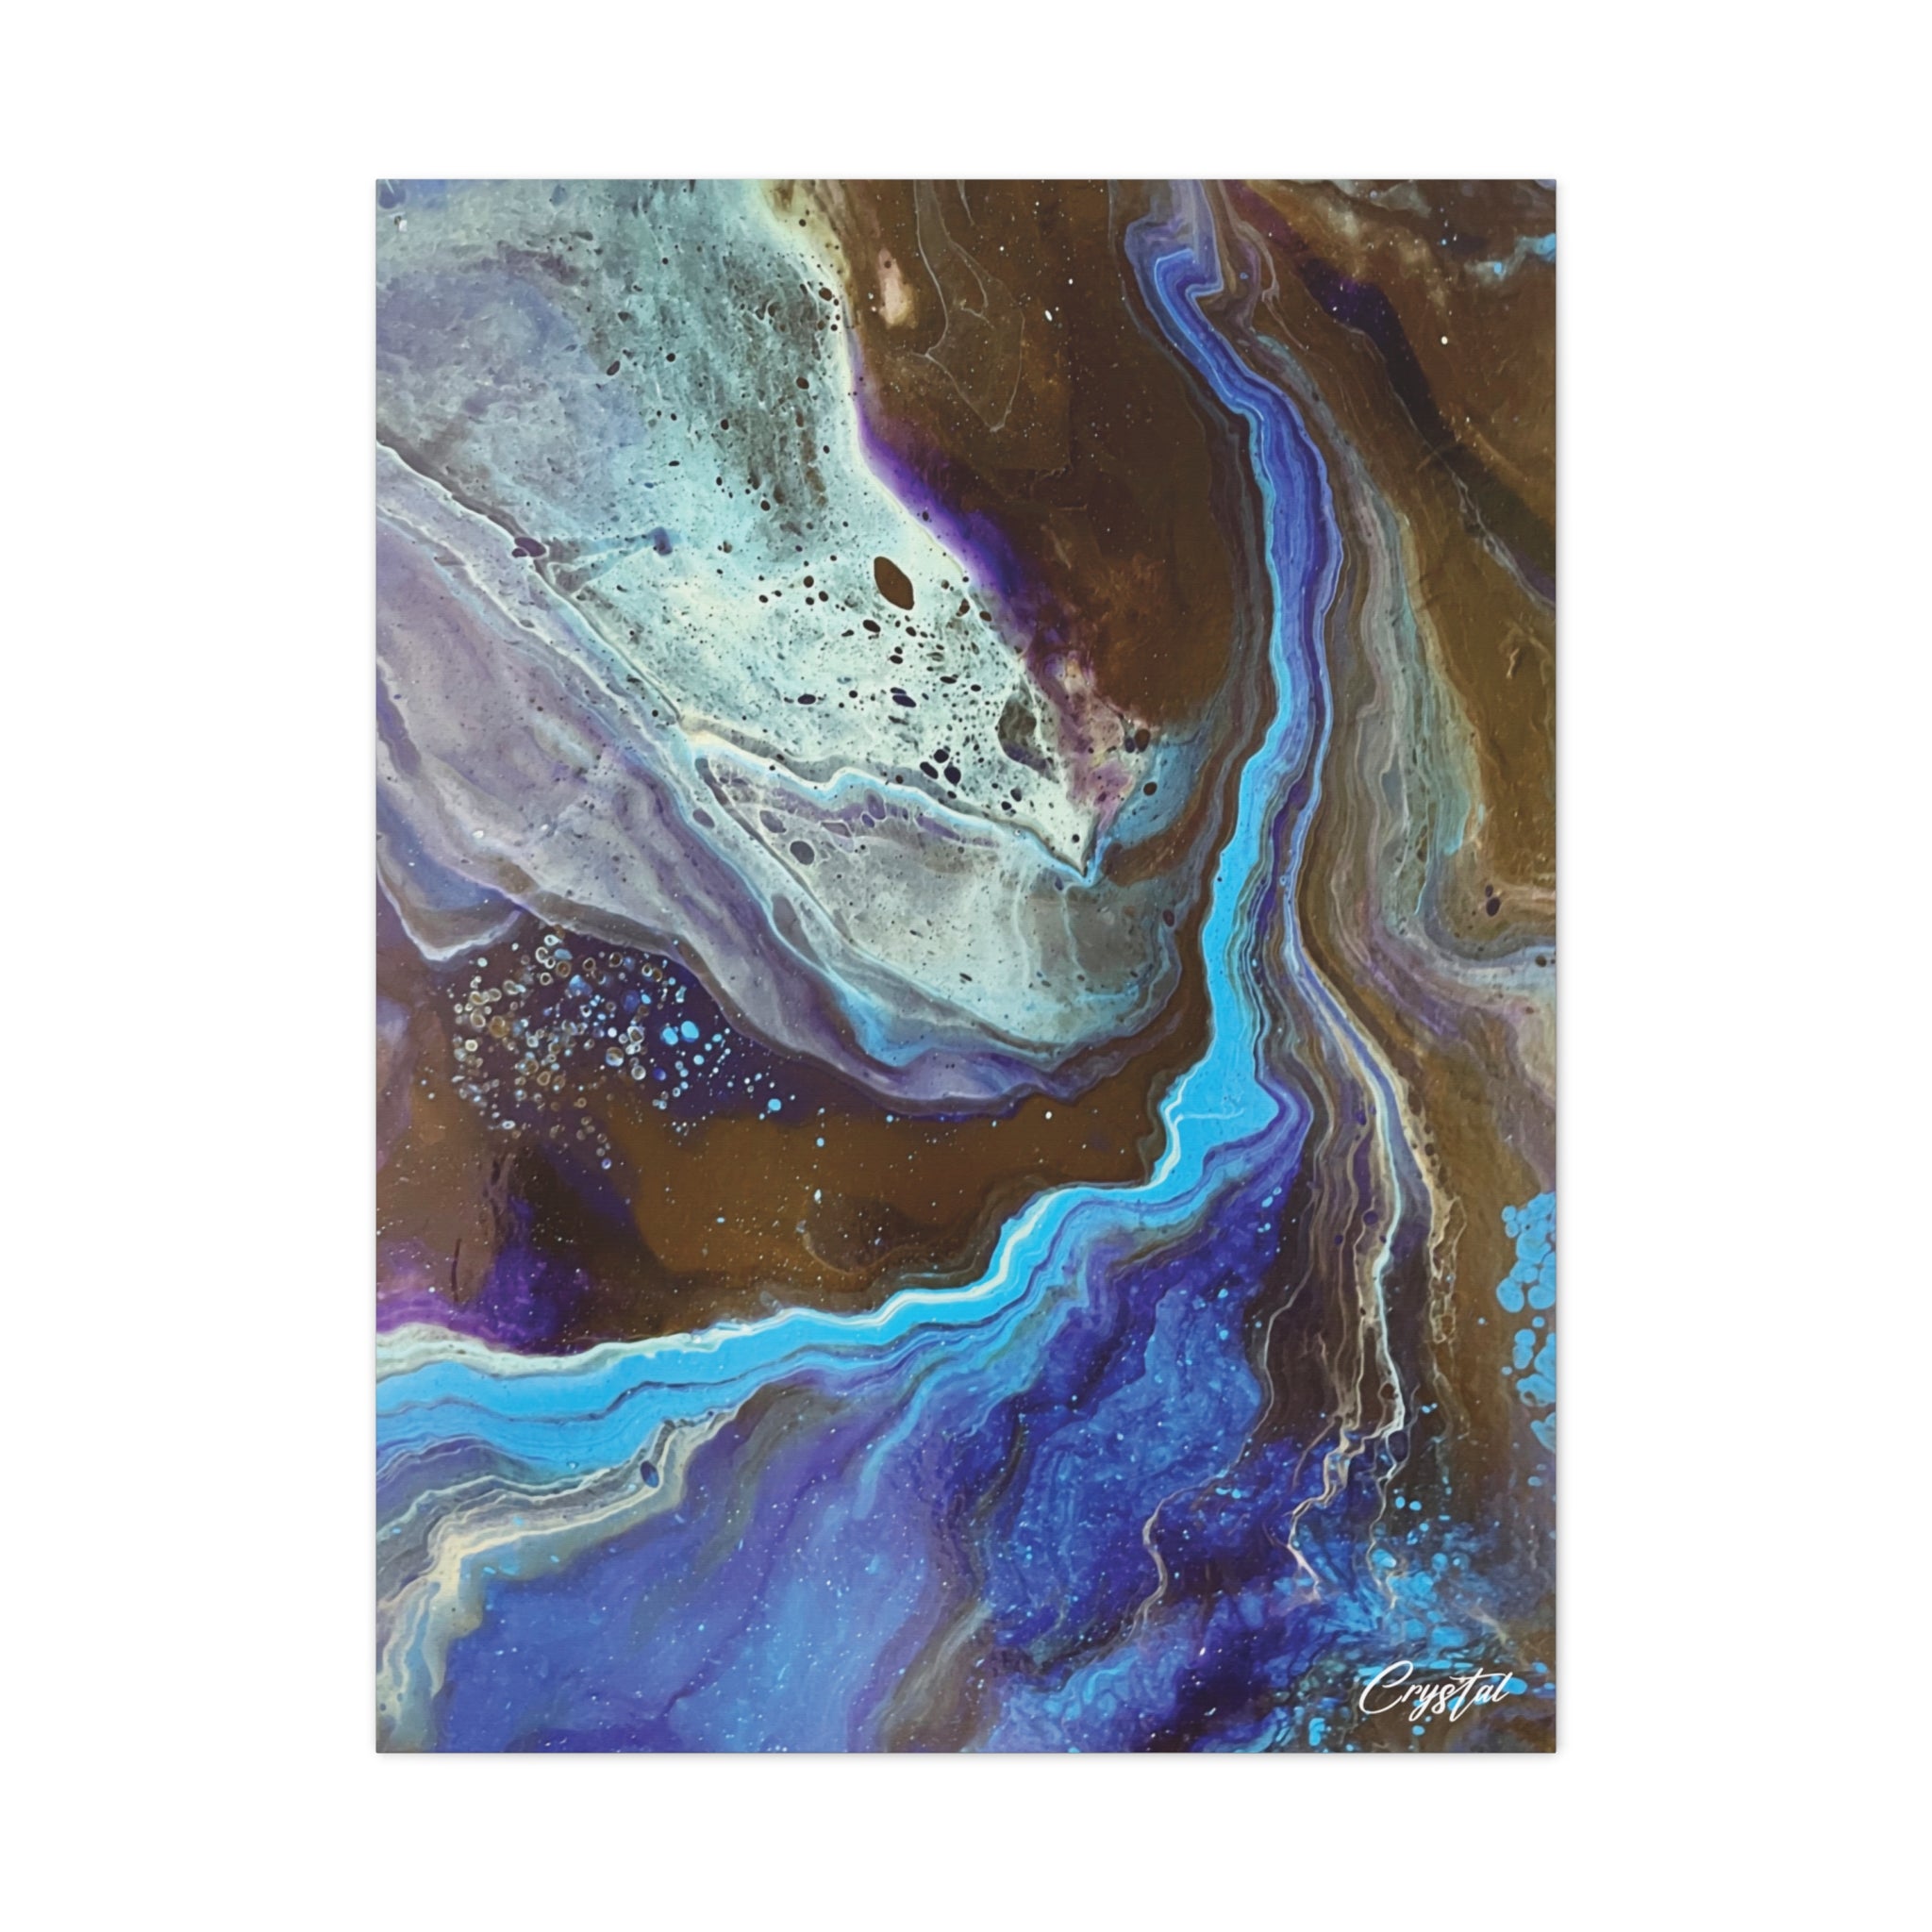 Depths of Calm Thoughts - Print Art